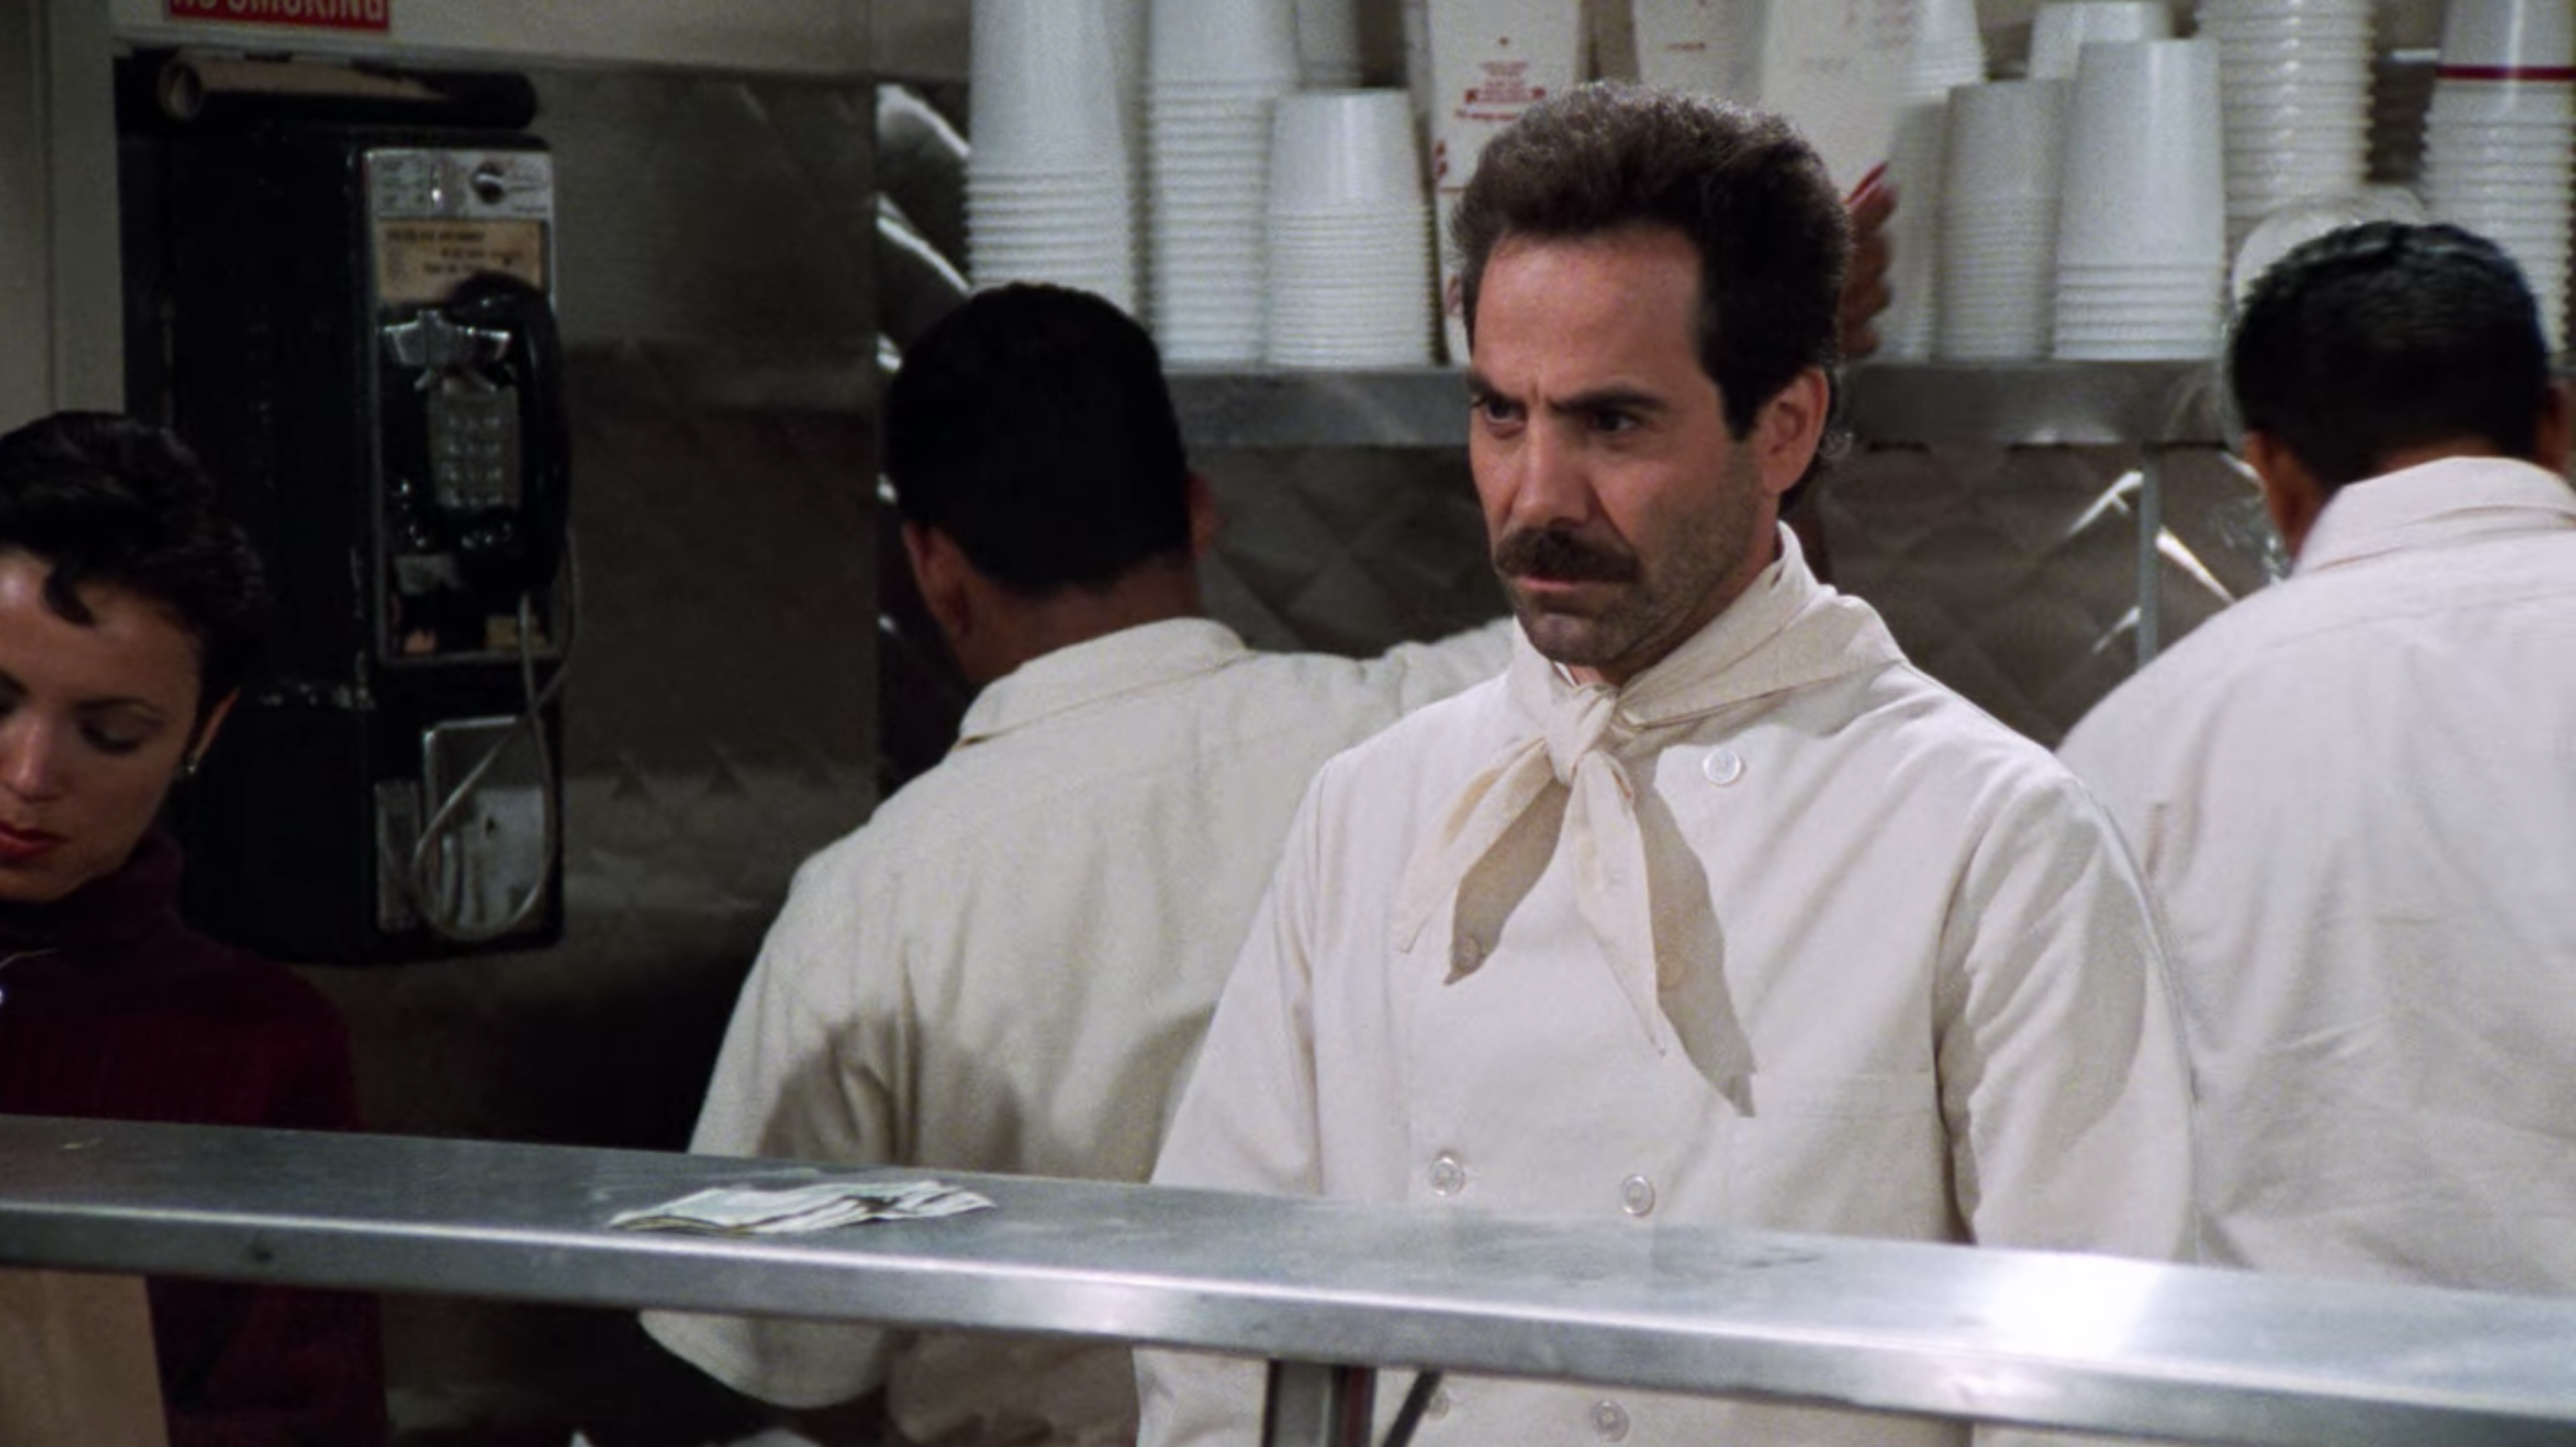 Yev Kassem in The Soup Nazi, one of the best seinfeld episodes